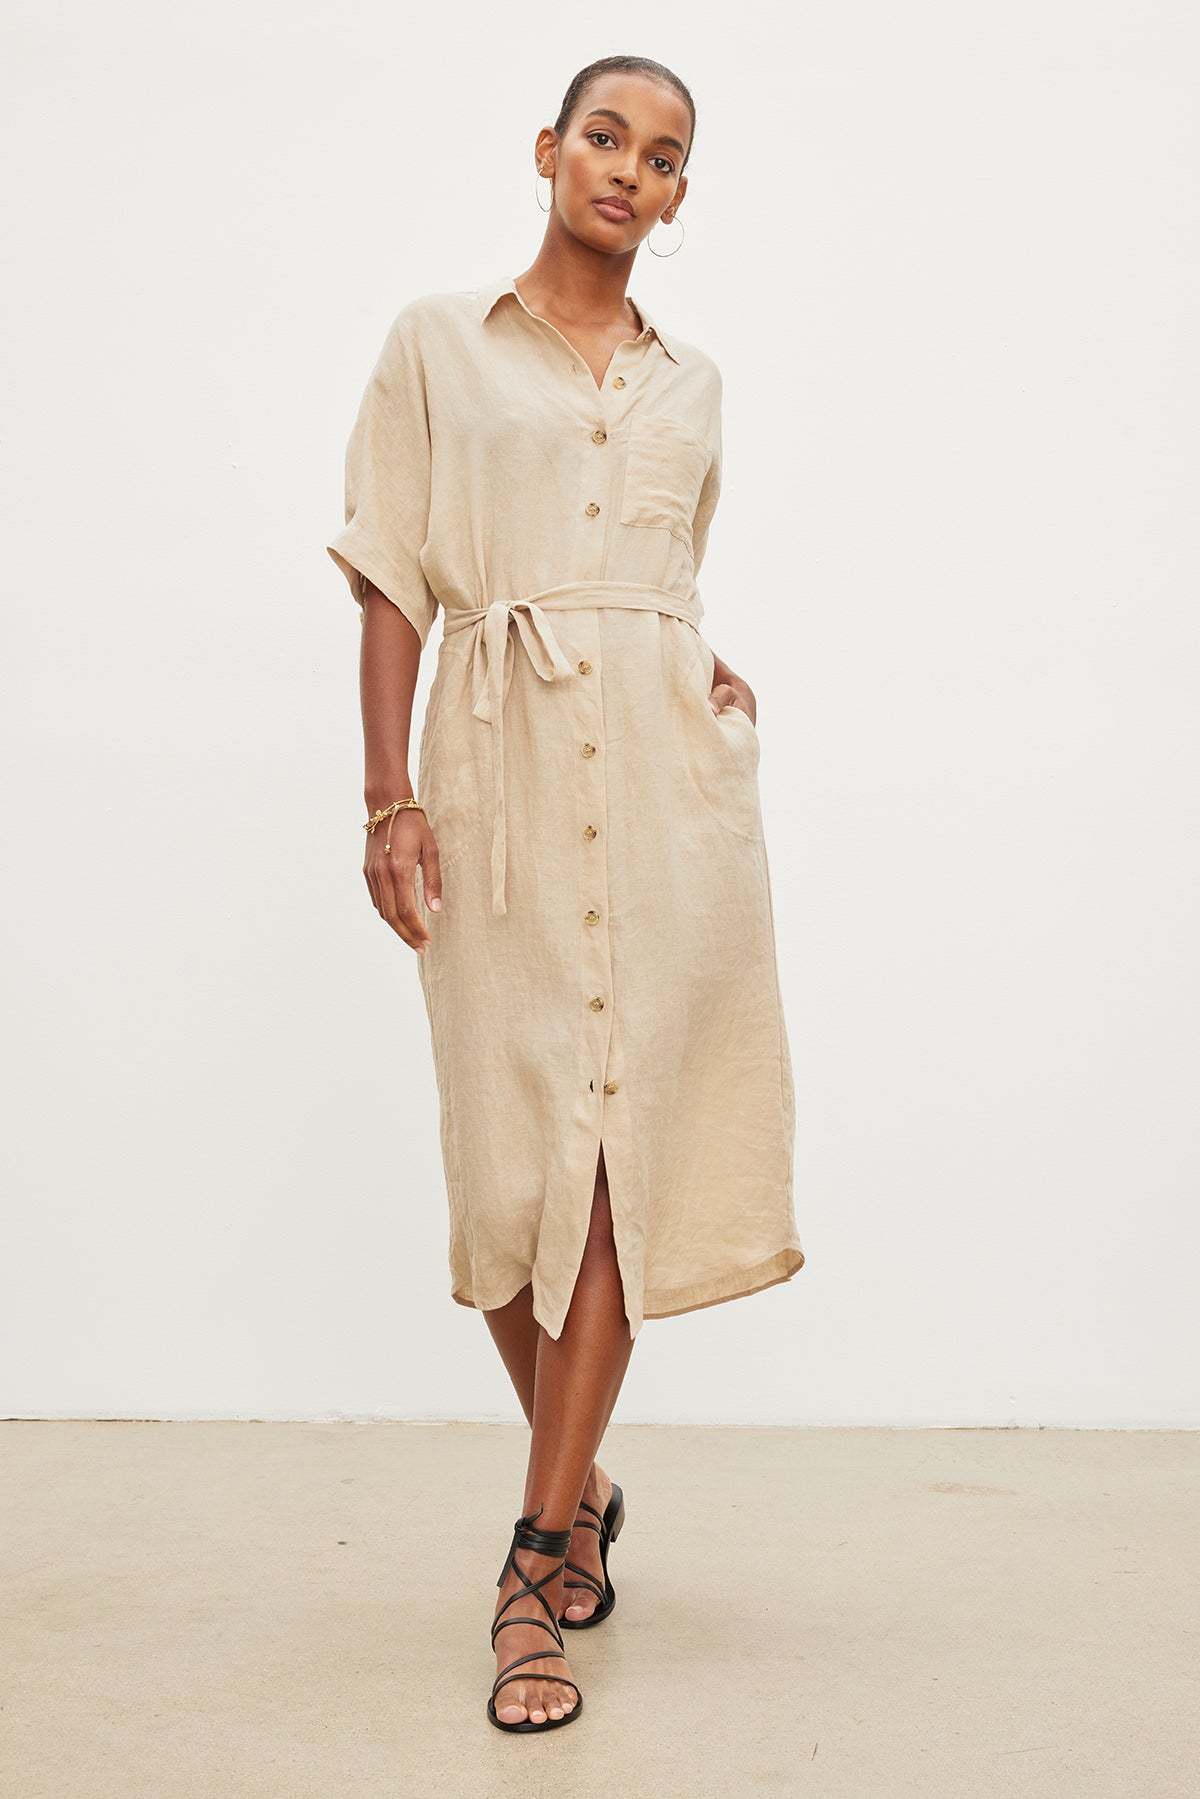 A woman models a beige mid-length SANDRA LINEN BUTTON-UP DRESS with a detachable belt, paired with black strappy sandals, in a plain studio setting by Velvet by Graham & Spencer.-35967717376193